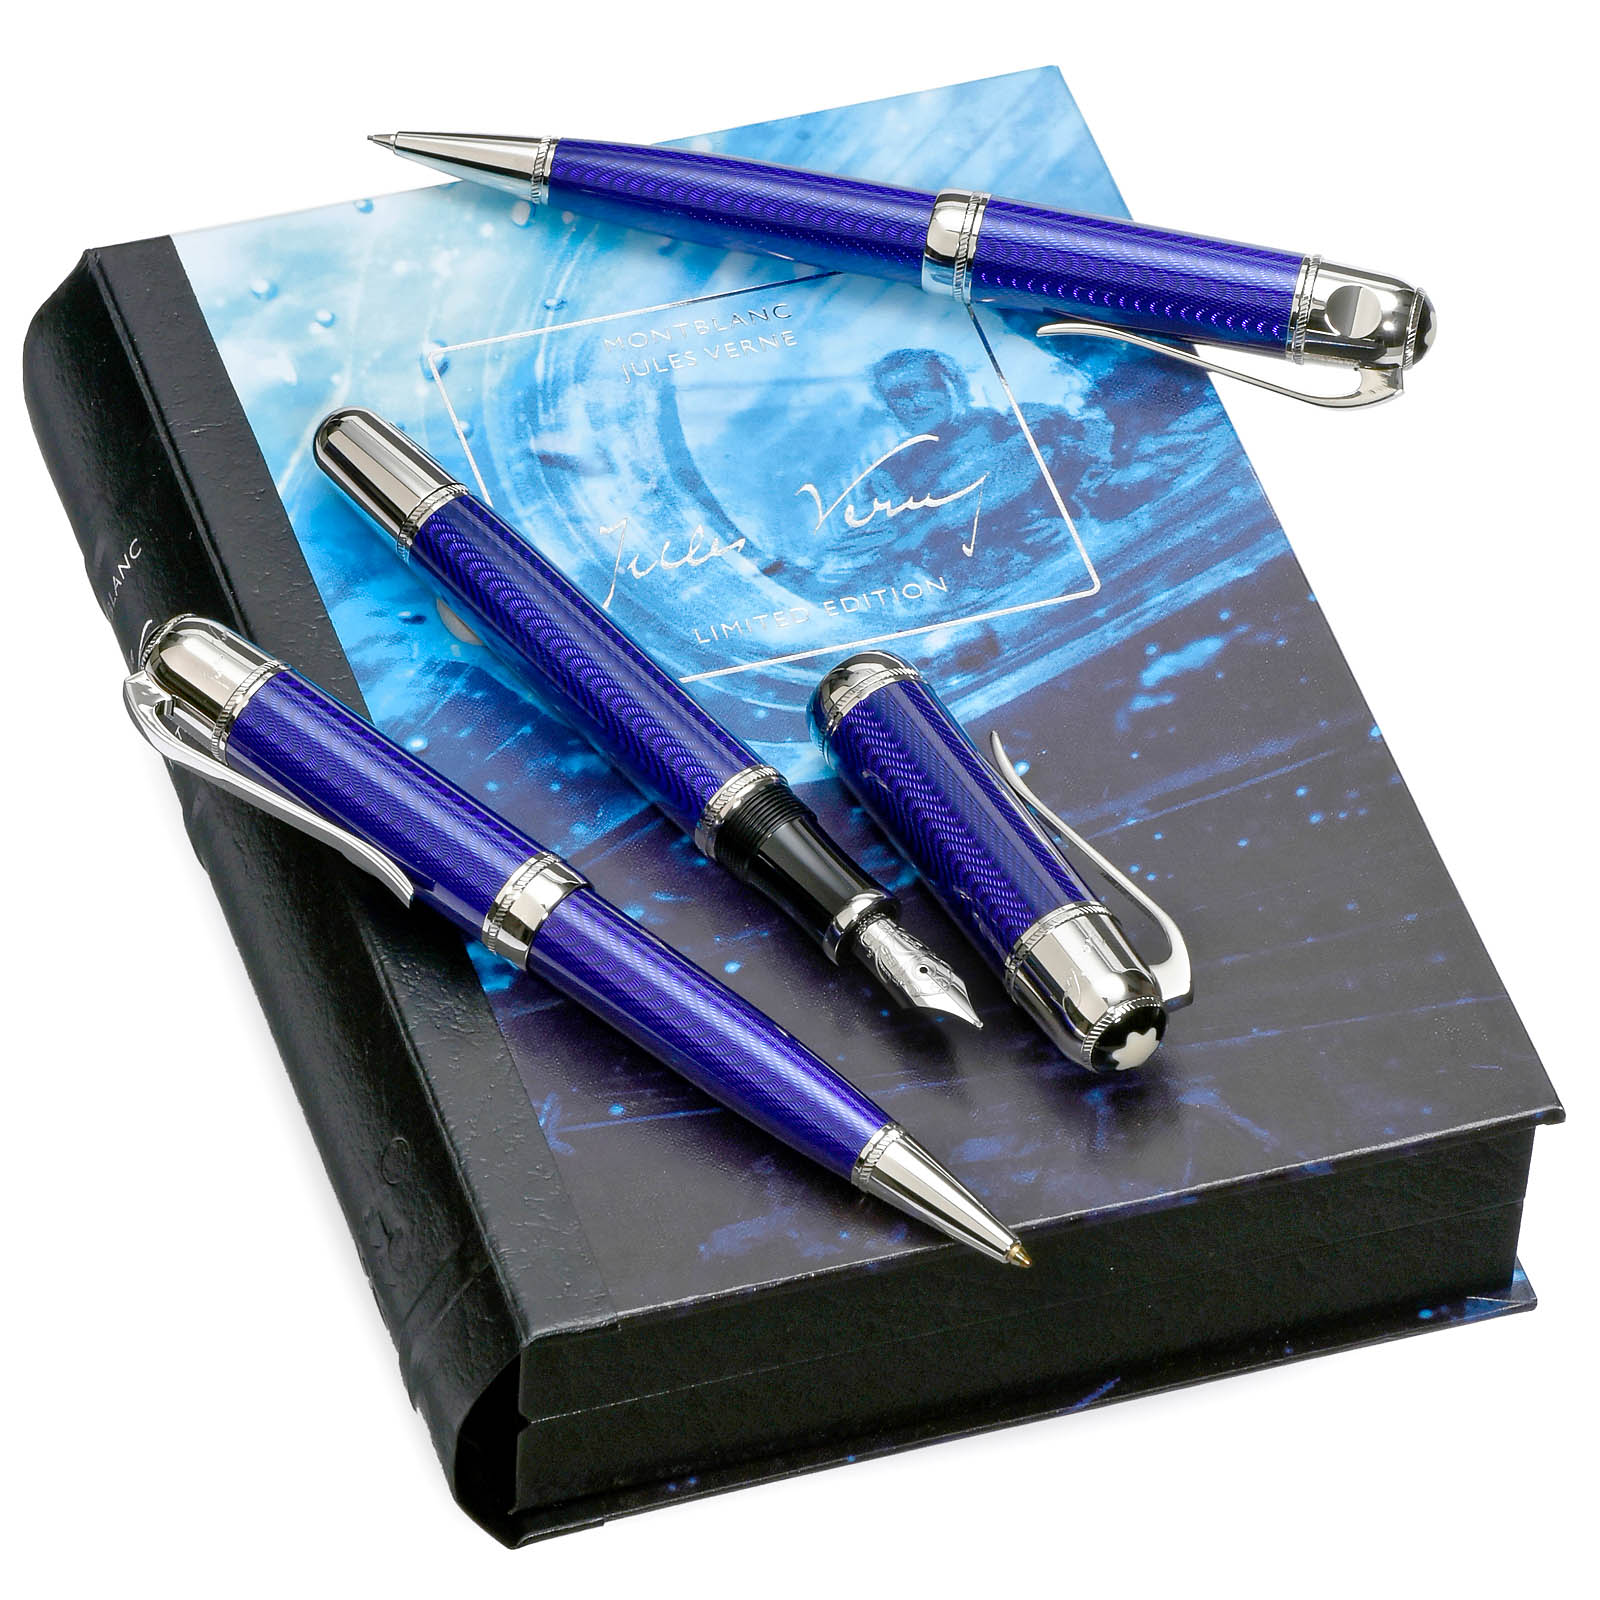 Montblanc "Jules Verne" Writing Set, 2003
Limited Writers Edition 3-piece set; comprising fountain